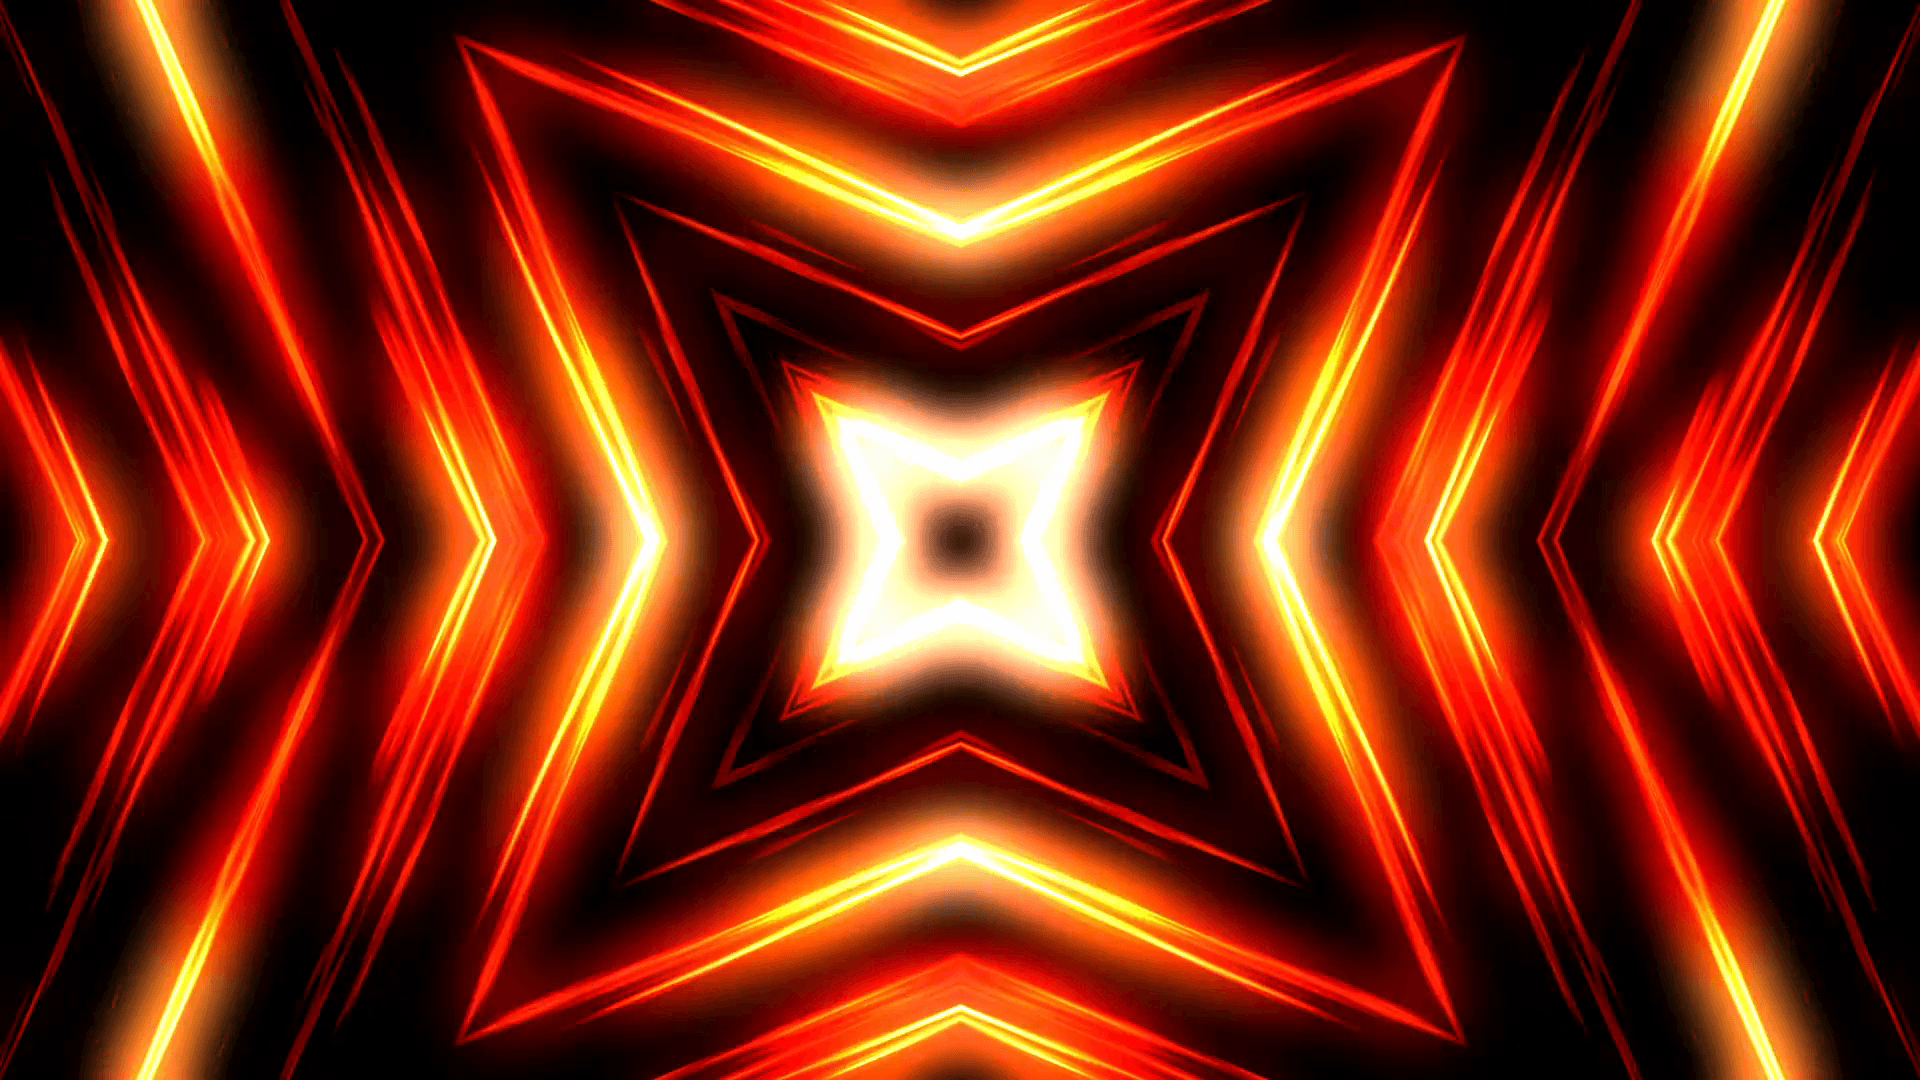 Crazy Fire Star Motion Backgrounds Motion Backgrounds.